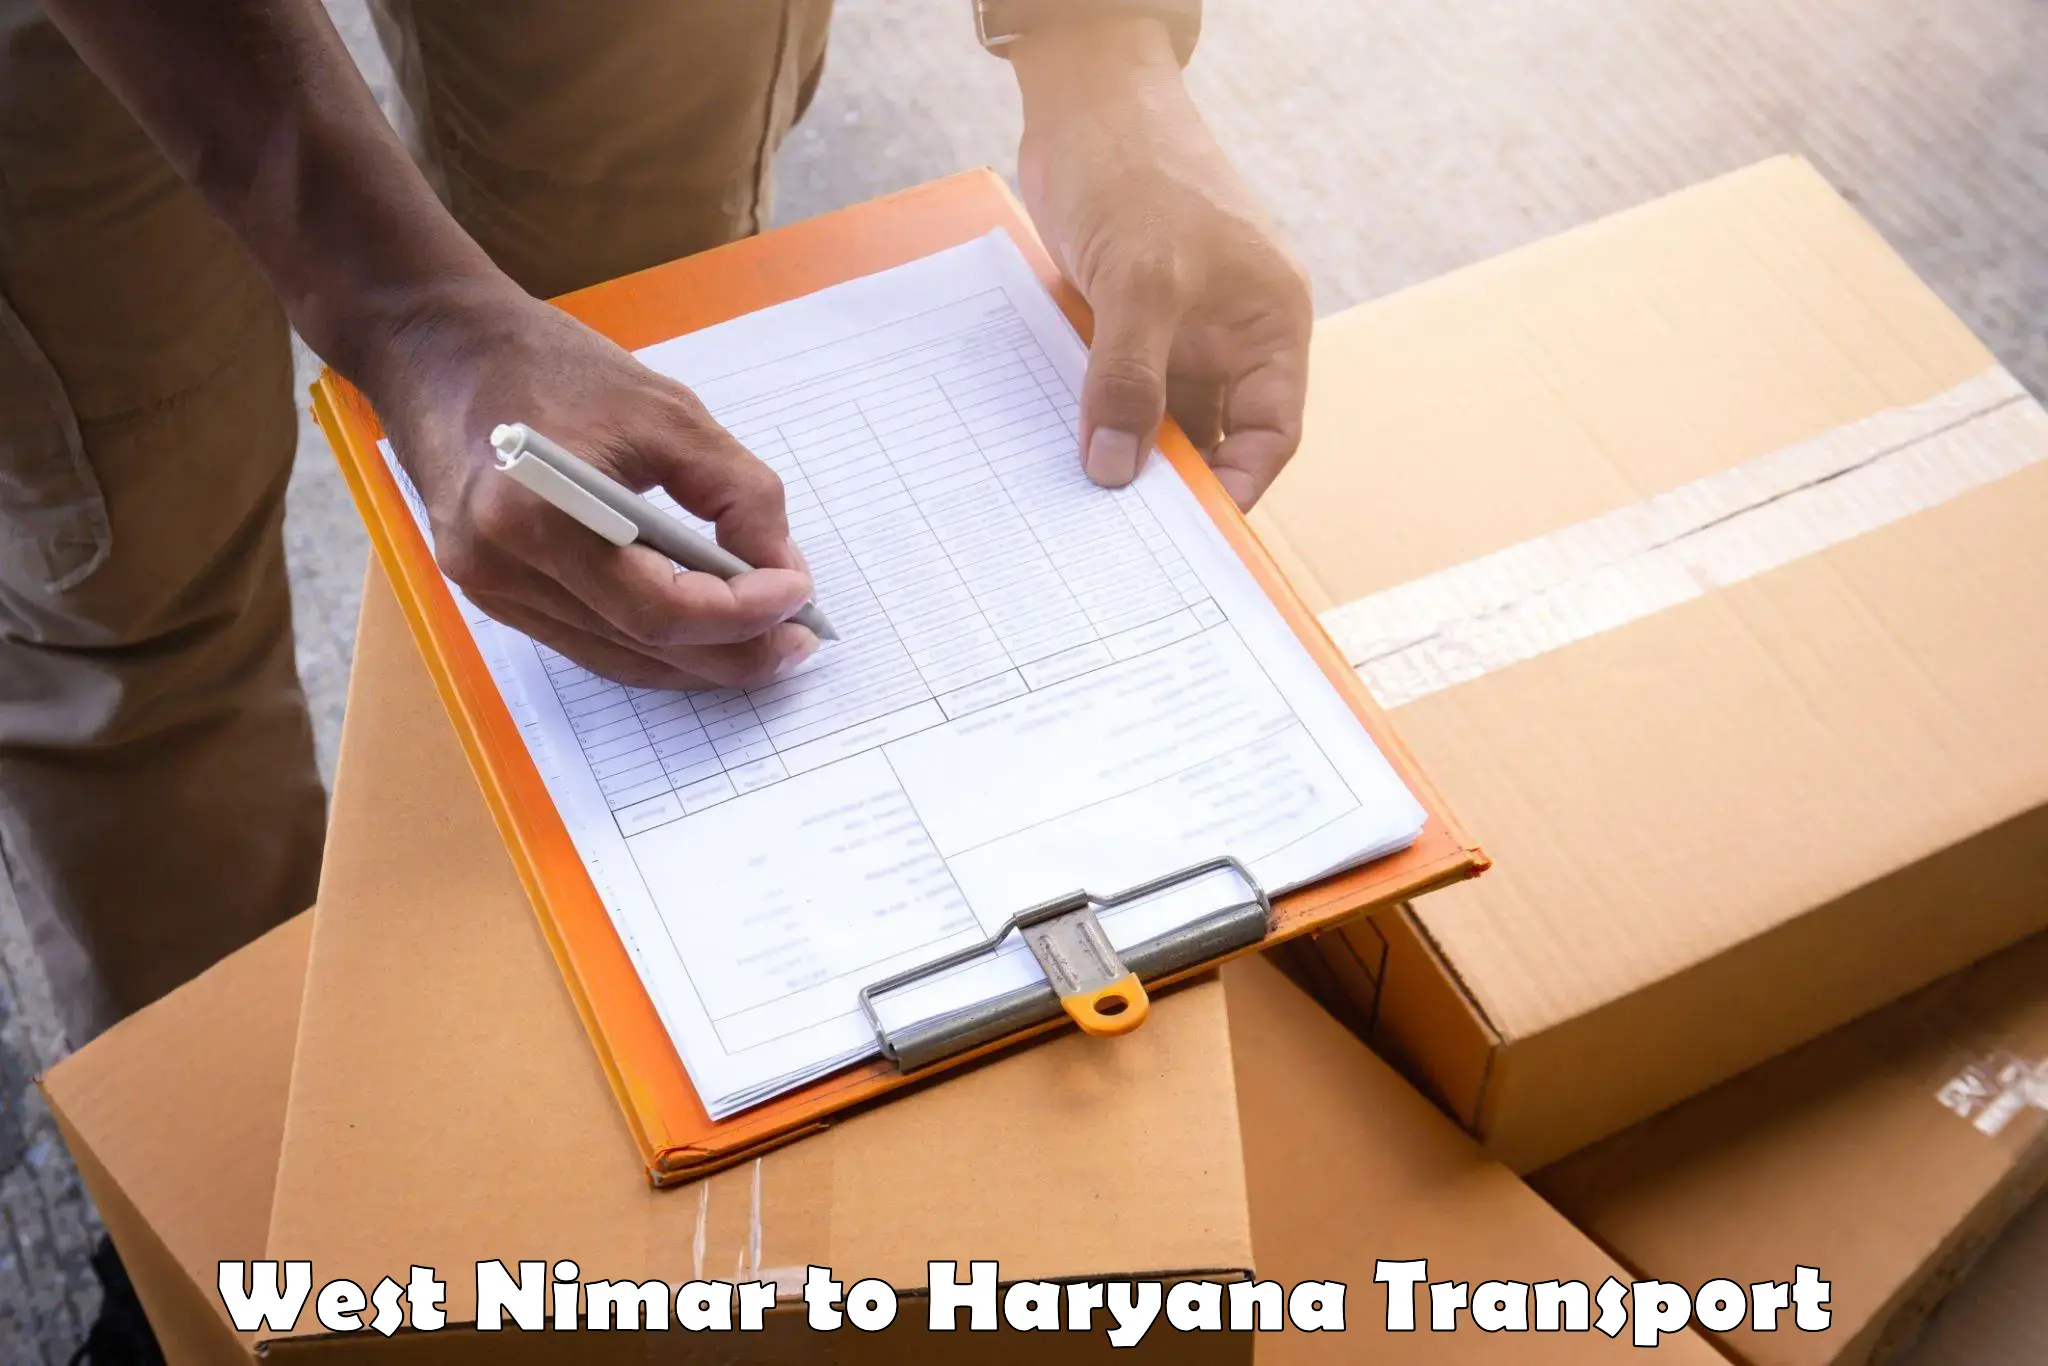 Daily parcel service transport West Nimar to Haryana